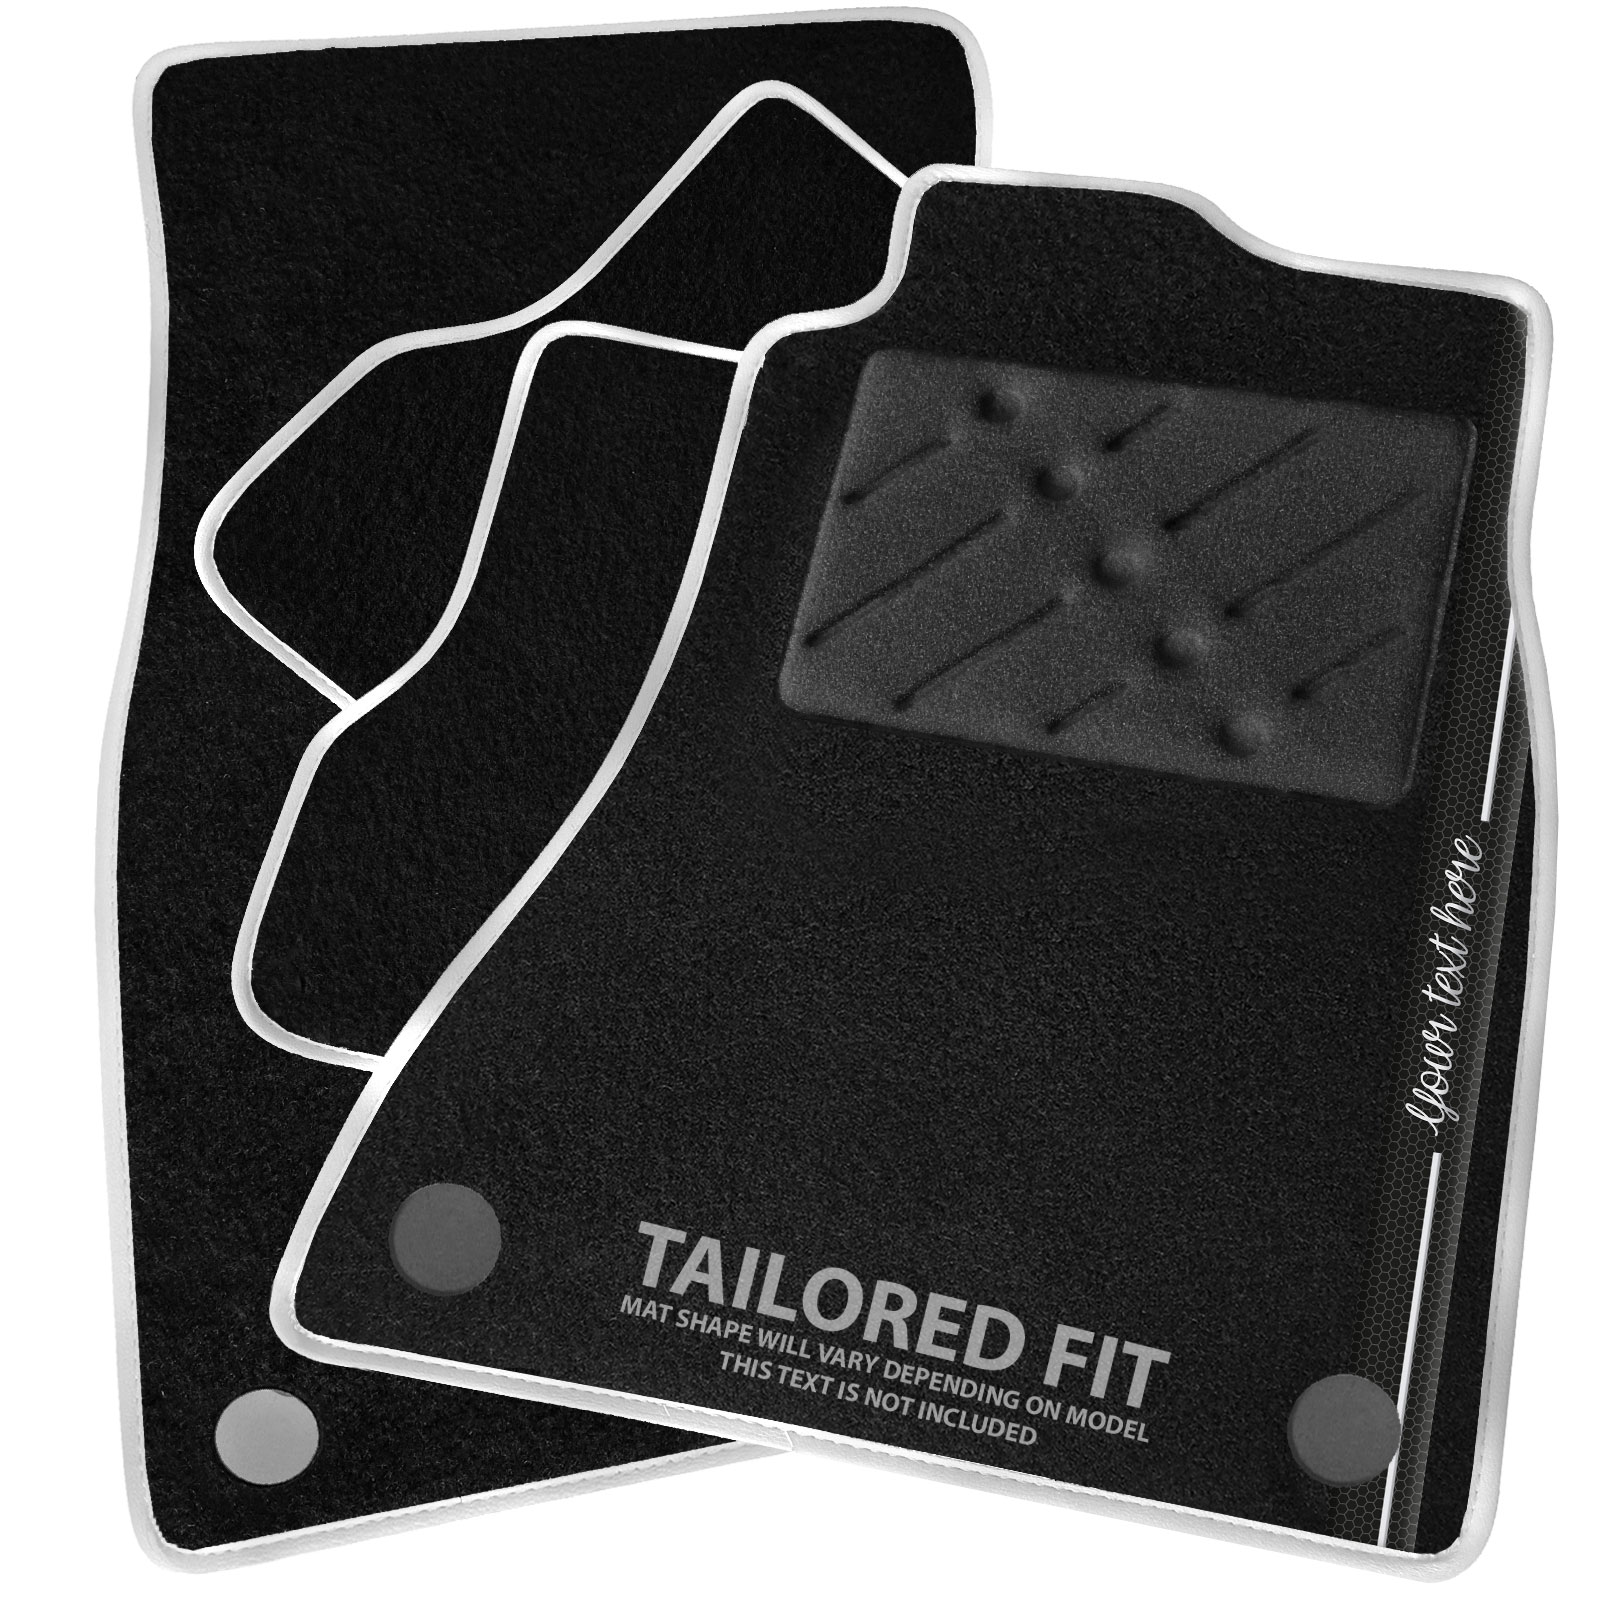 13mm Eyelet Fixings Fully Tailored Deluxe Car Mats in Black 